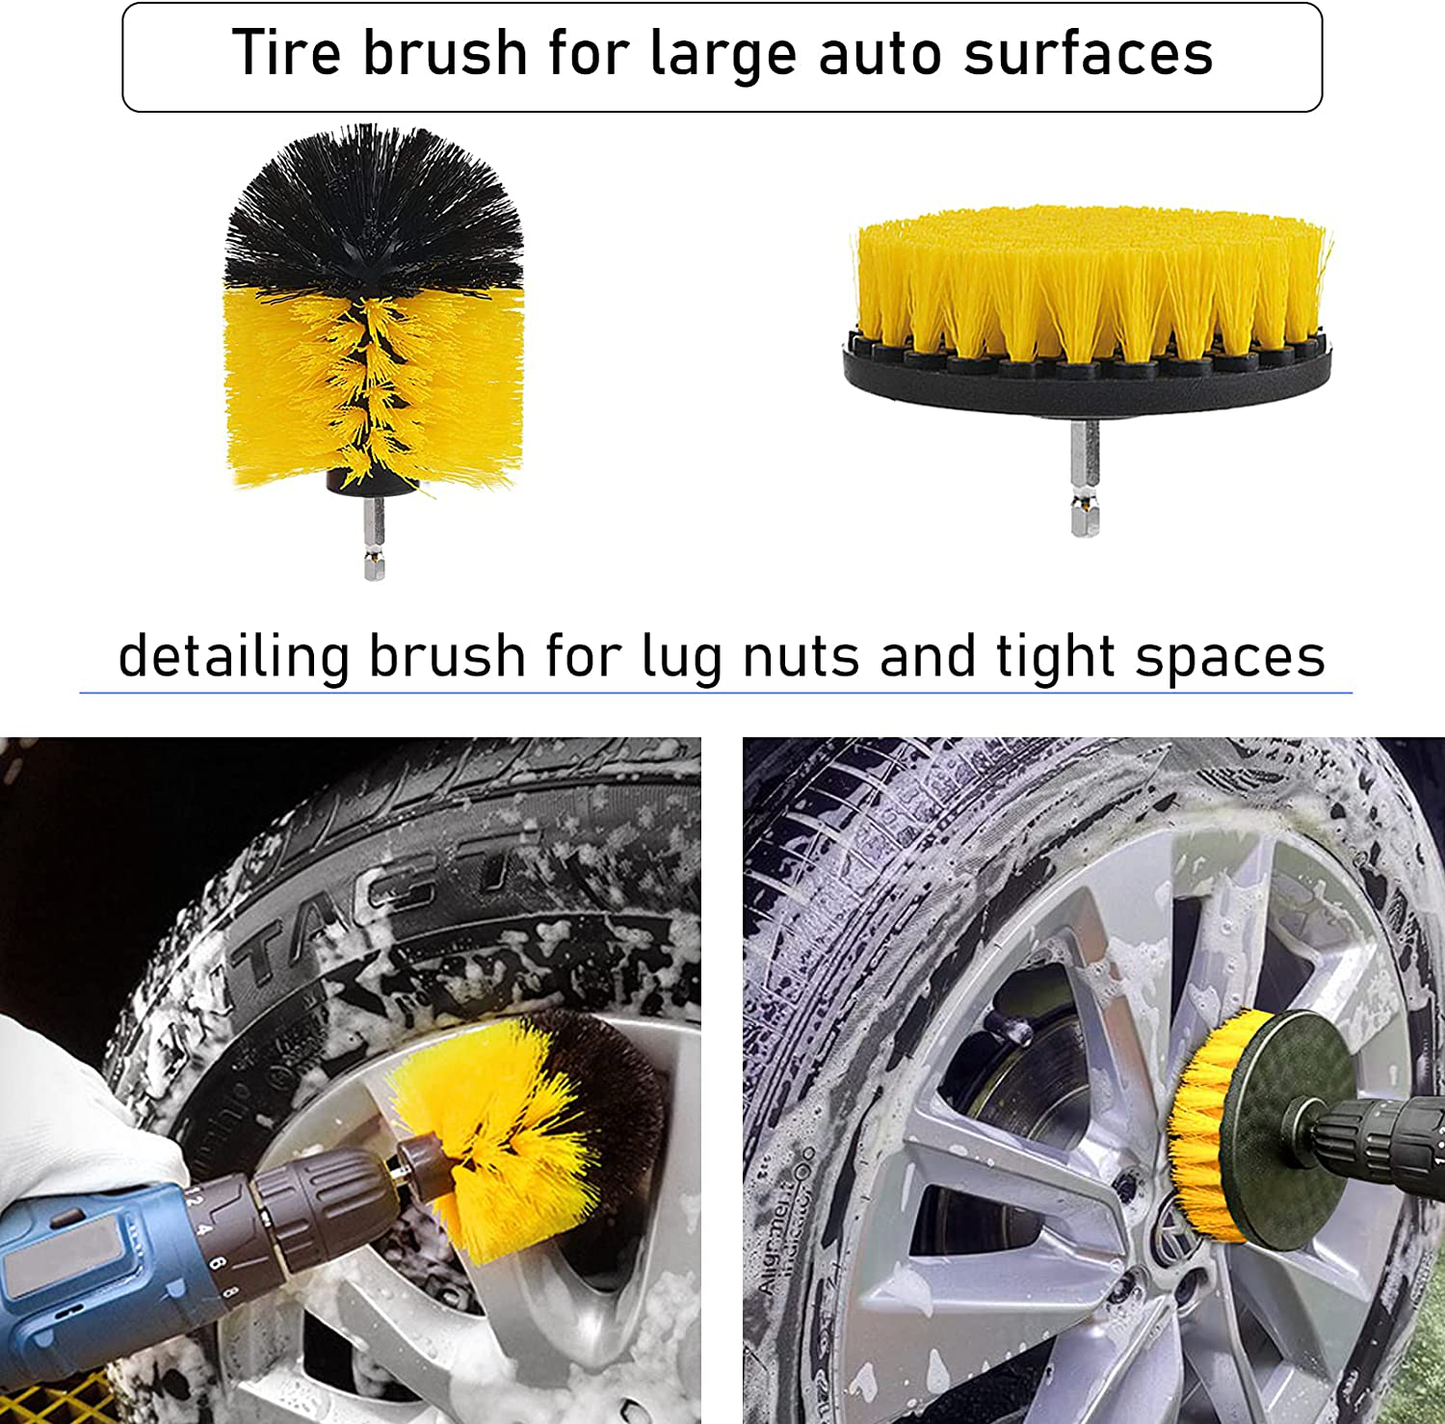 TTCR-II 16 Pcs Car Wheel/Tyre Cleaner and Drill Brush Set, Detailing Brush, Dashboard Mini Duster, Microfiber Mit and Towel, Sponge Polishing Pad, Thread Backing Pad, Drill Power Scrubber Brushes